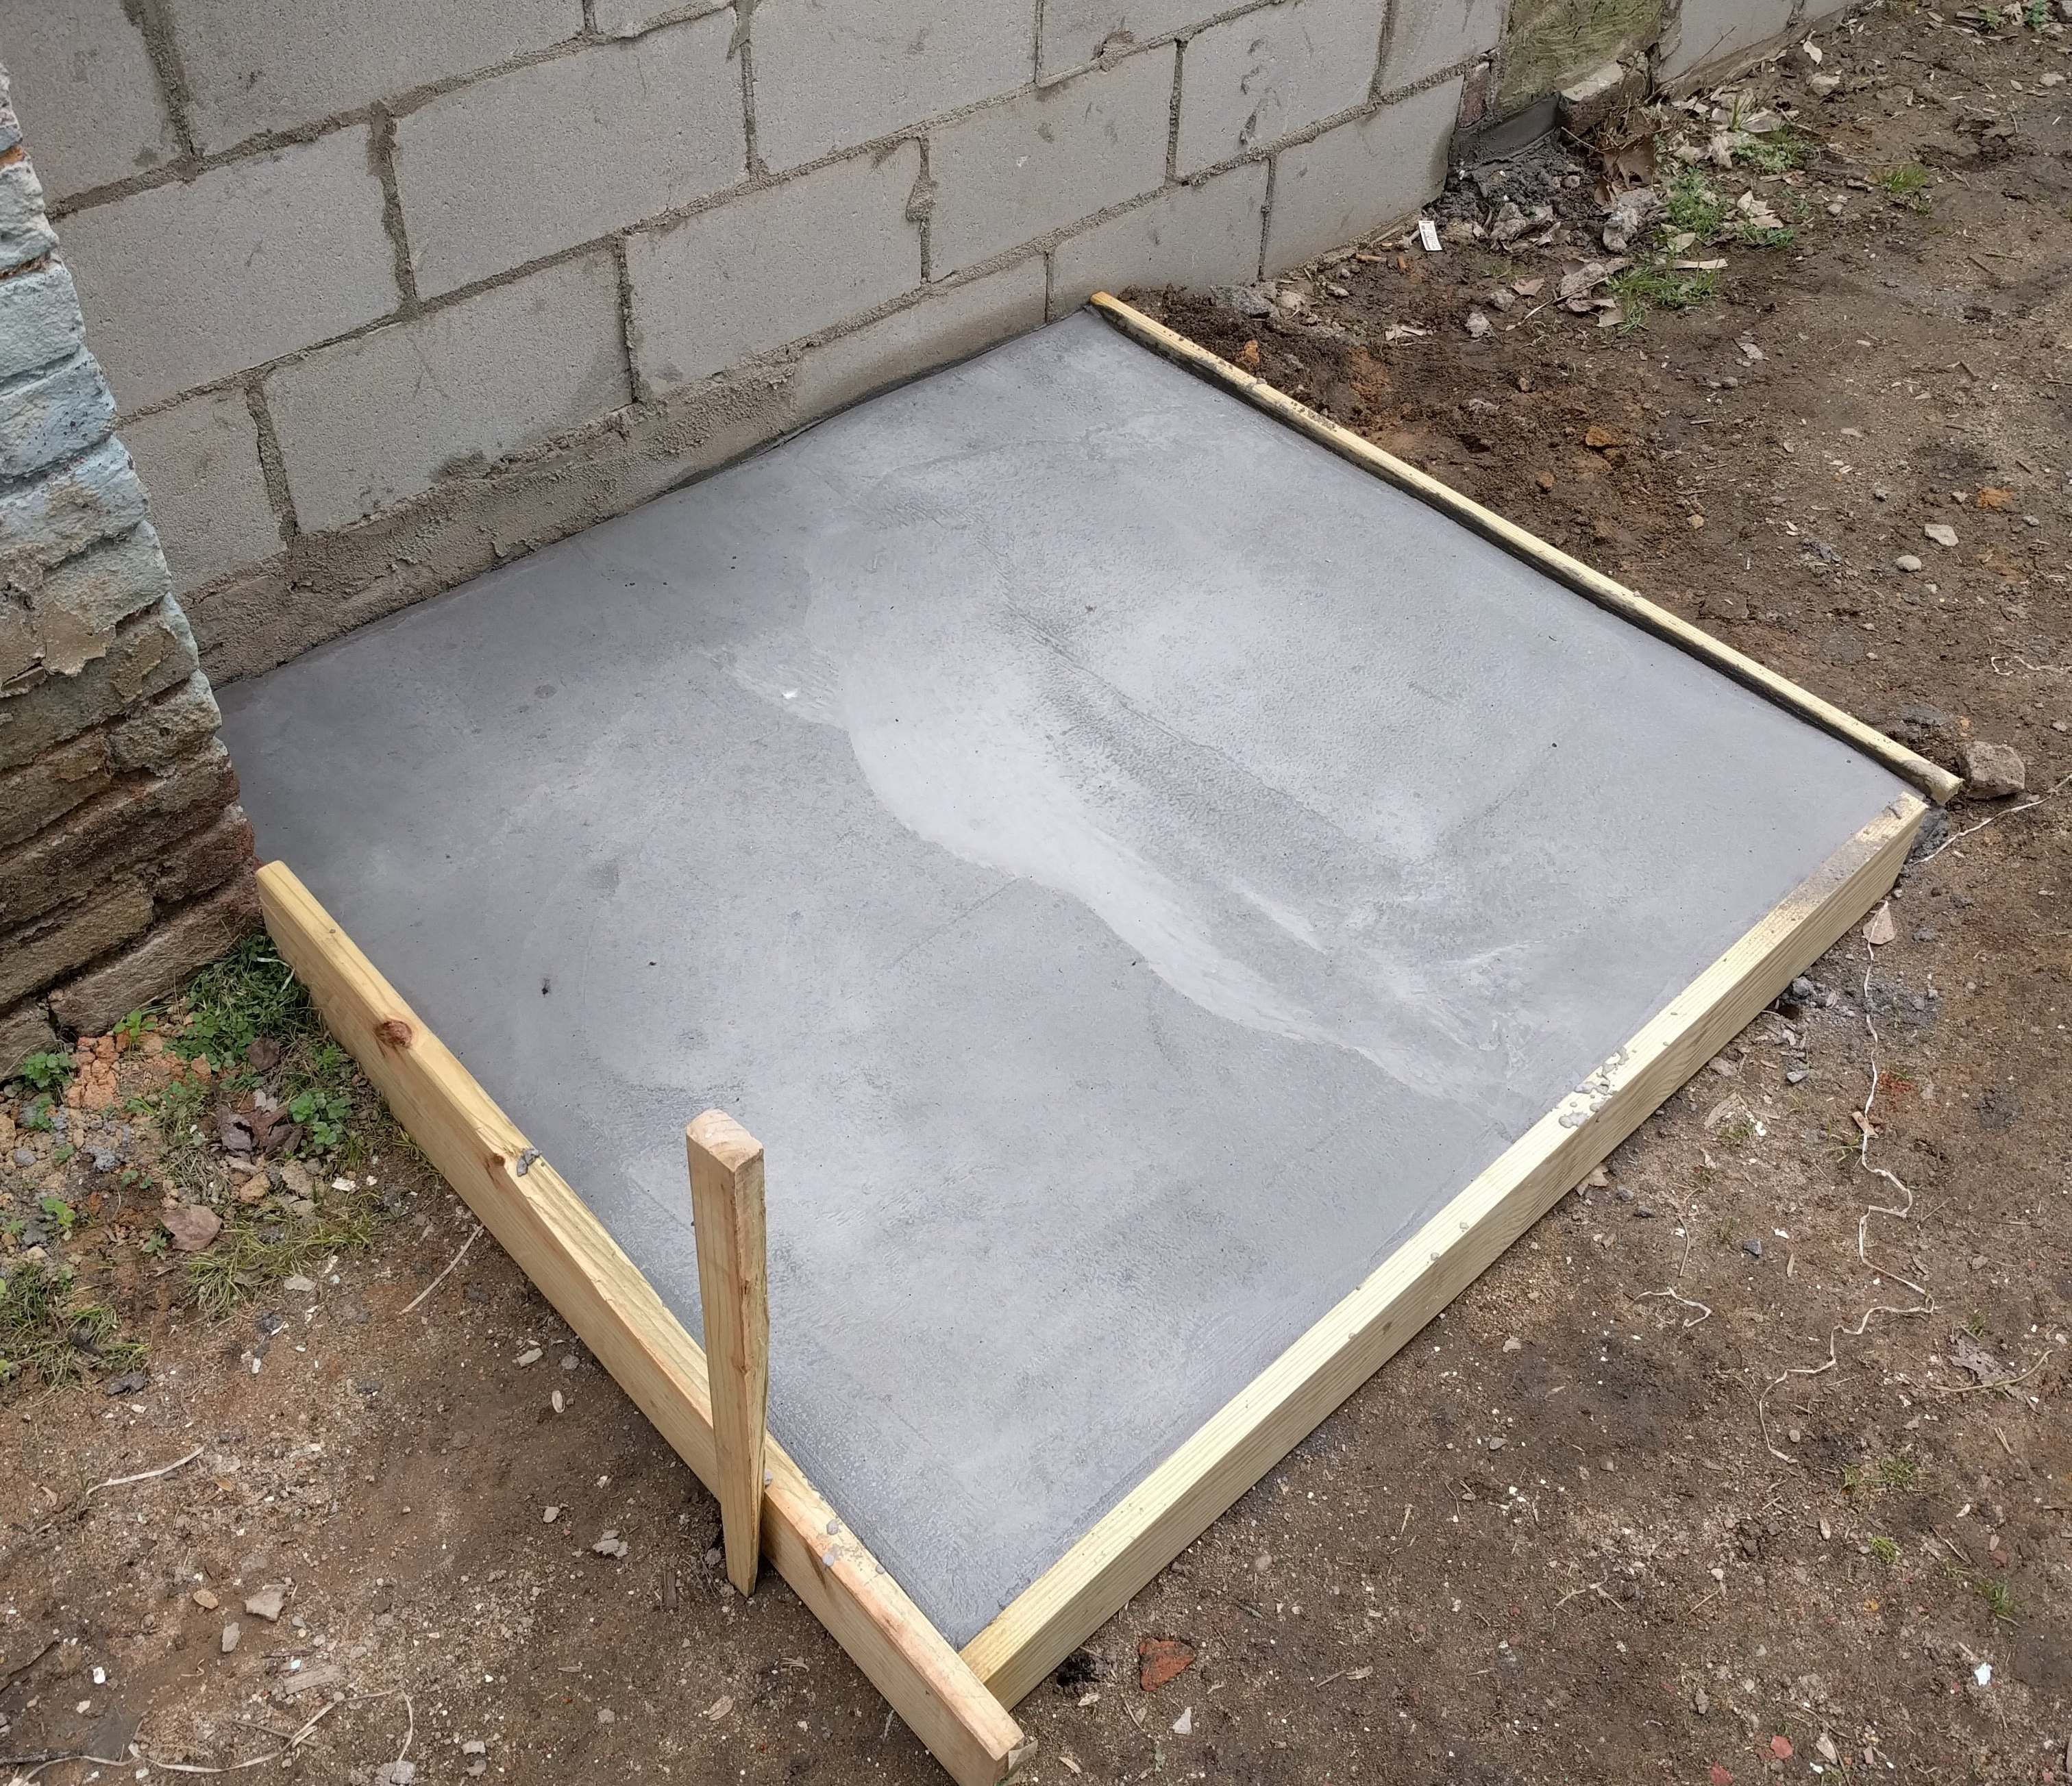 Pad for air conditioning unit